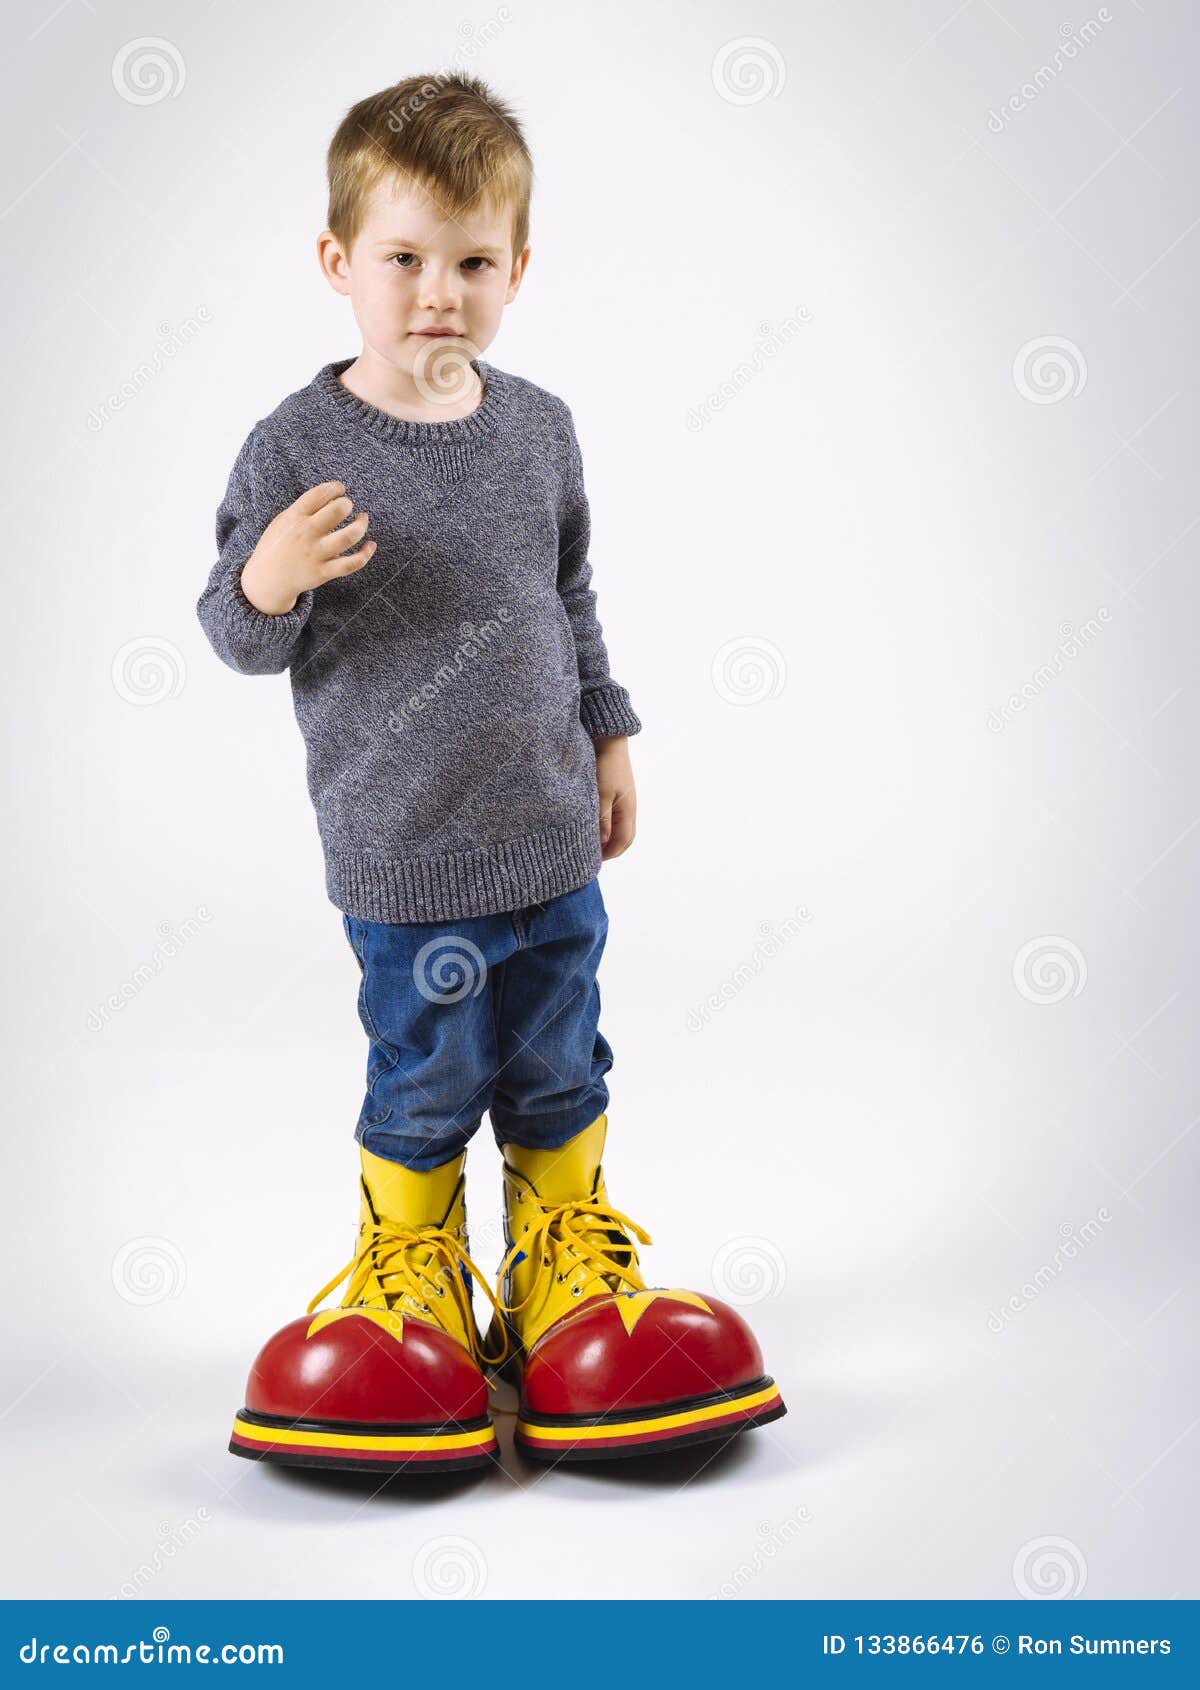 pawn Saturate surprise Small Boy with Big Clown Shoes Stock Photo - Image of cute, large: 133866476